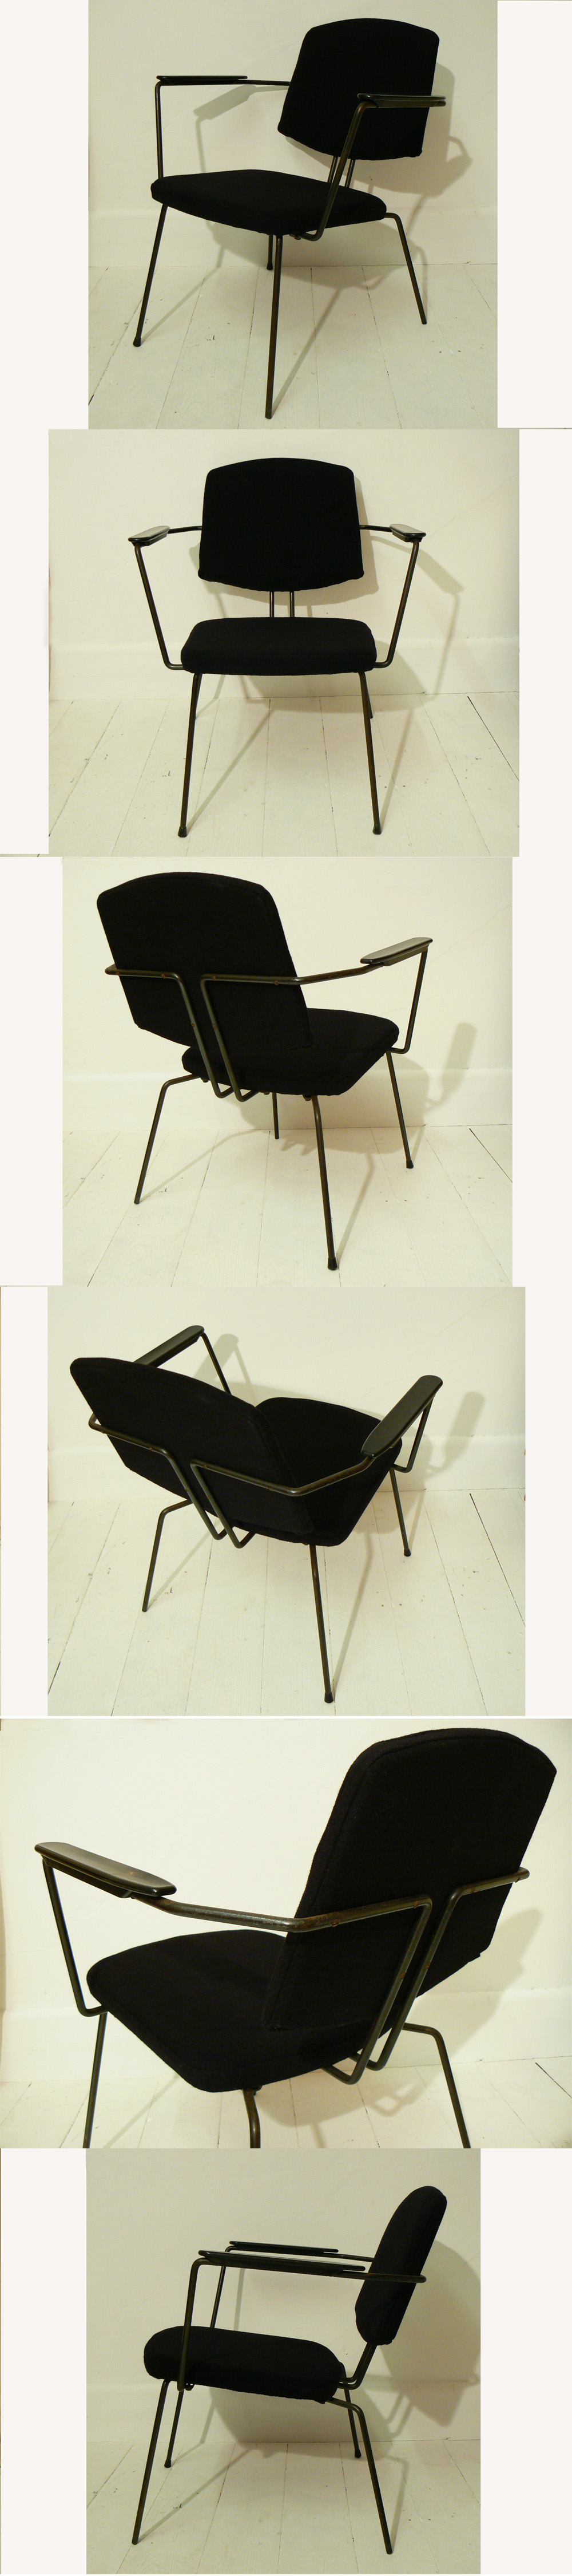 A series 5003 armchair designed by Rudolf Wolf and manufactured by Elsrijk, Holland. Newly upholstered in black wool.